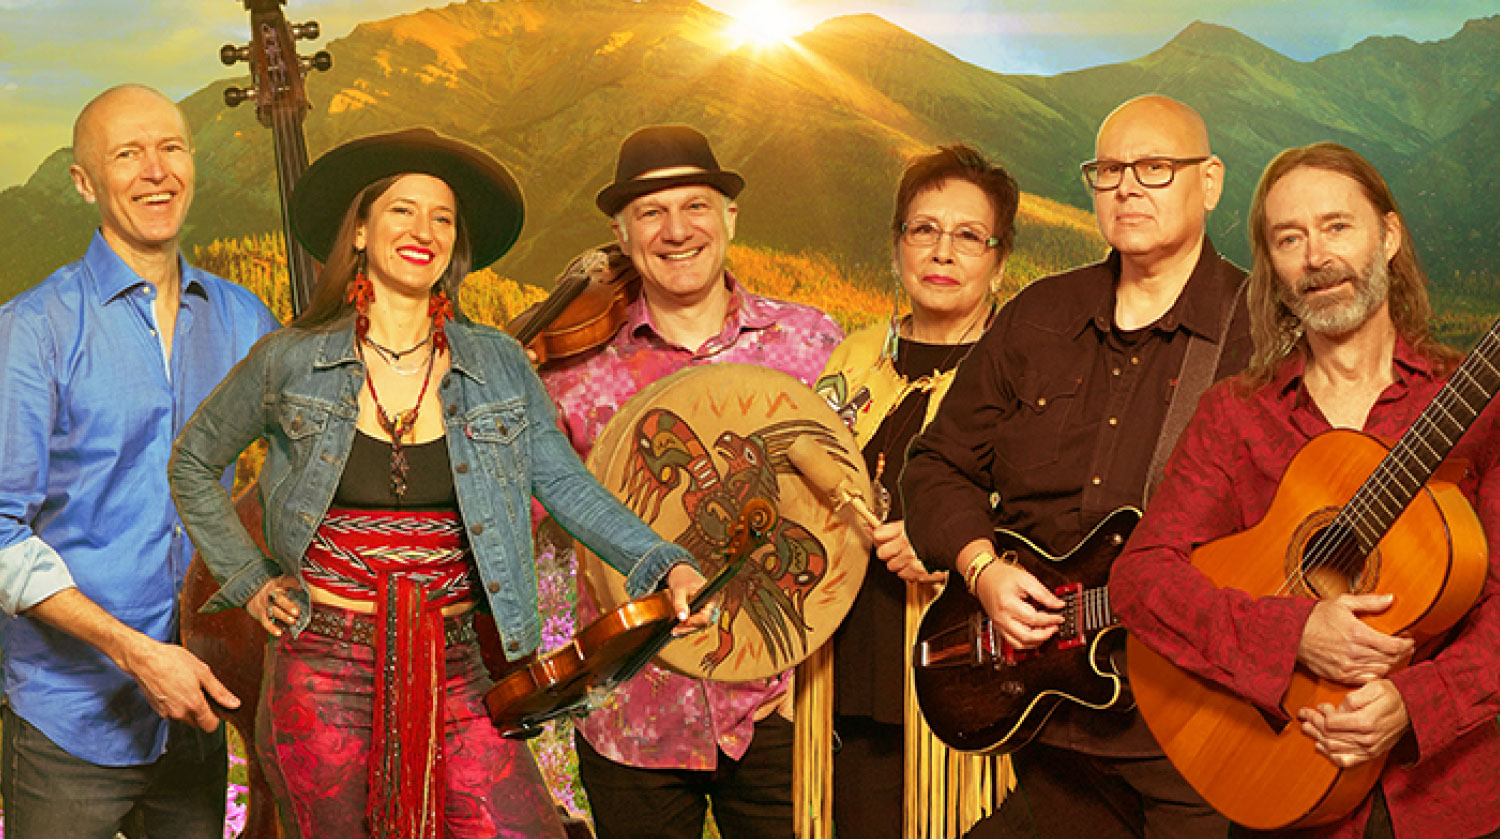 Image of the six members that comprise of Walking Through Fire the band. The musicians stand side by side smiling, wearing bright coloured clothing, and holding an array of instruments including an acoustic guitar, electric guitar, violin and hand-held drum. The drum displays an illustration of an eagle. Behind them is an image of a mountain with the sun setting beyond it.